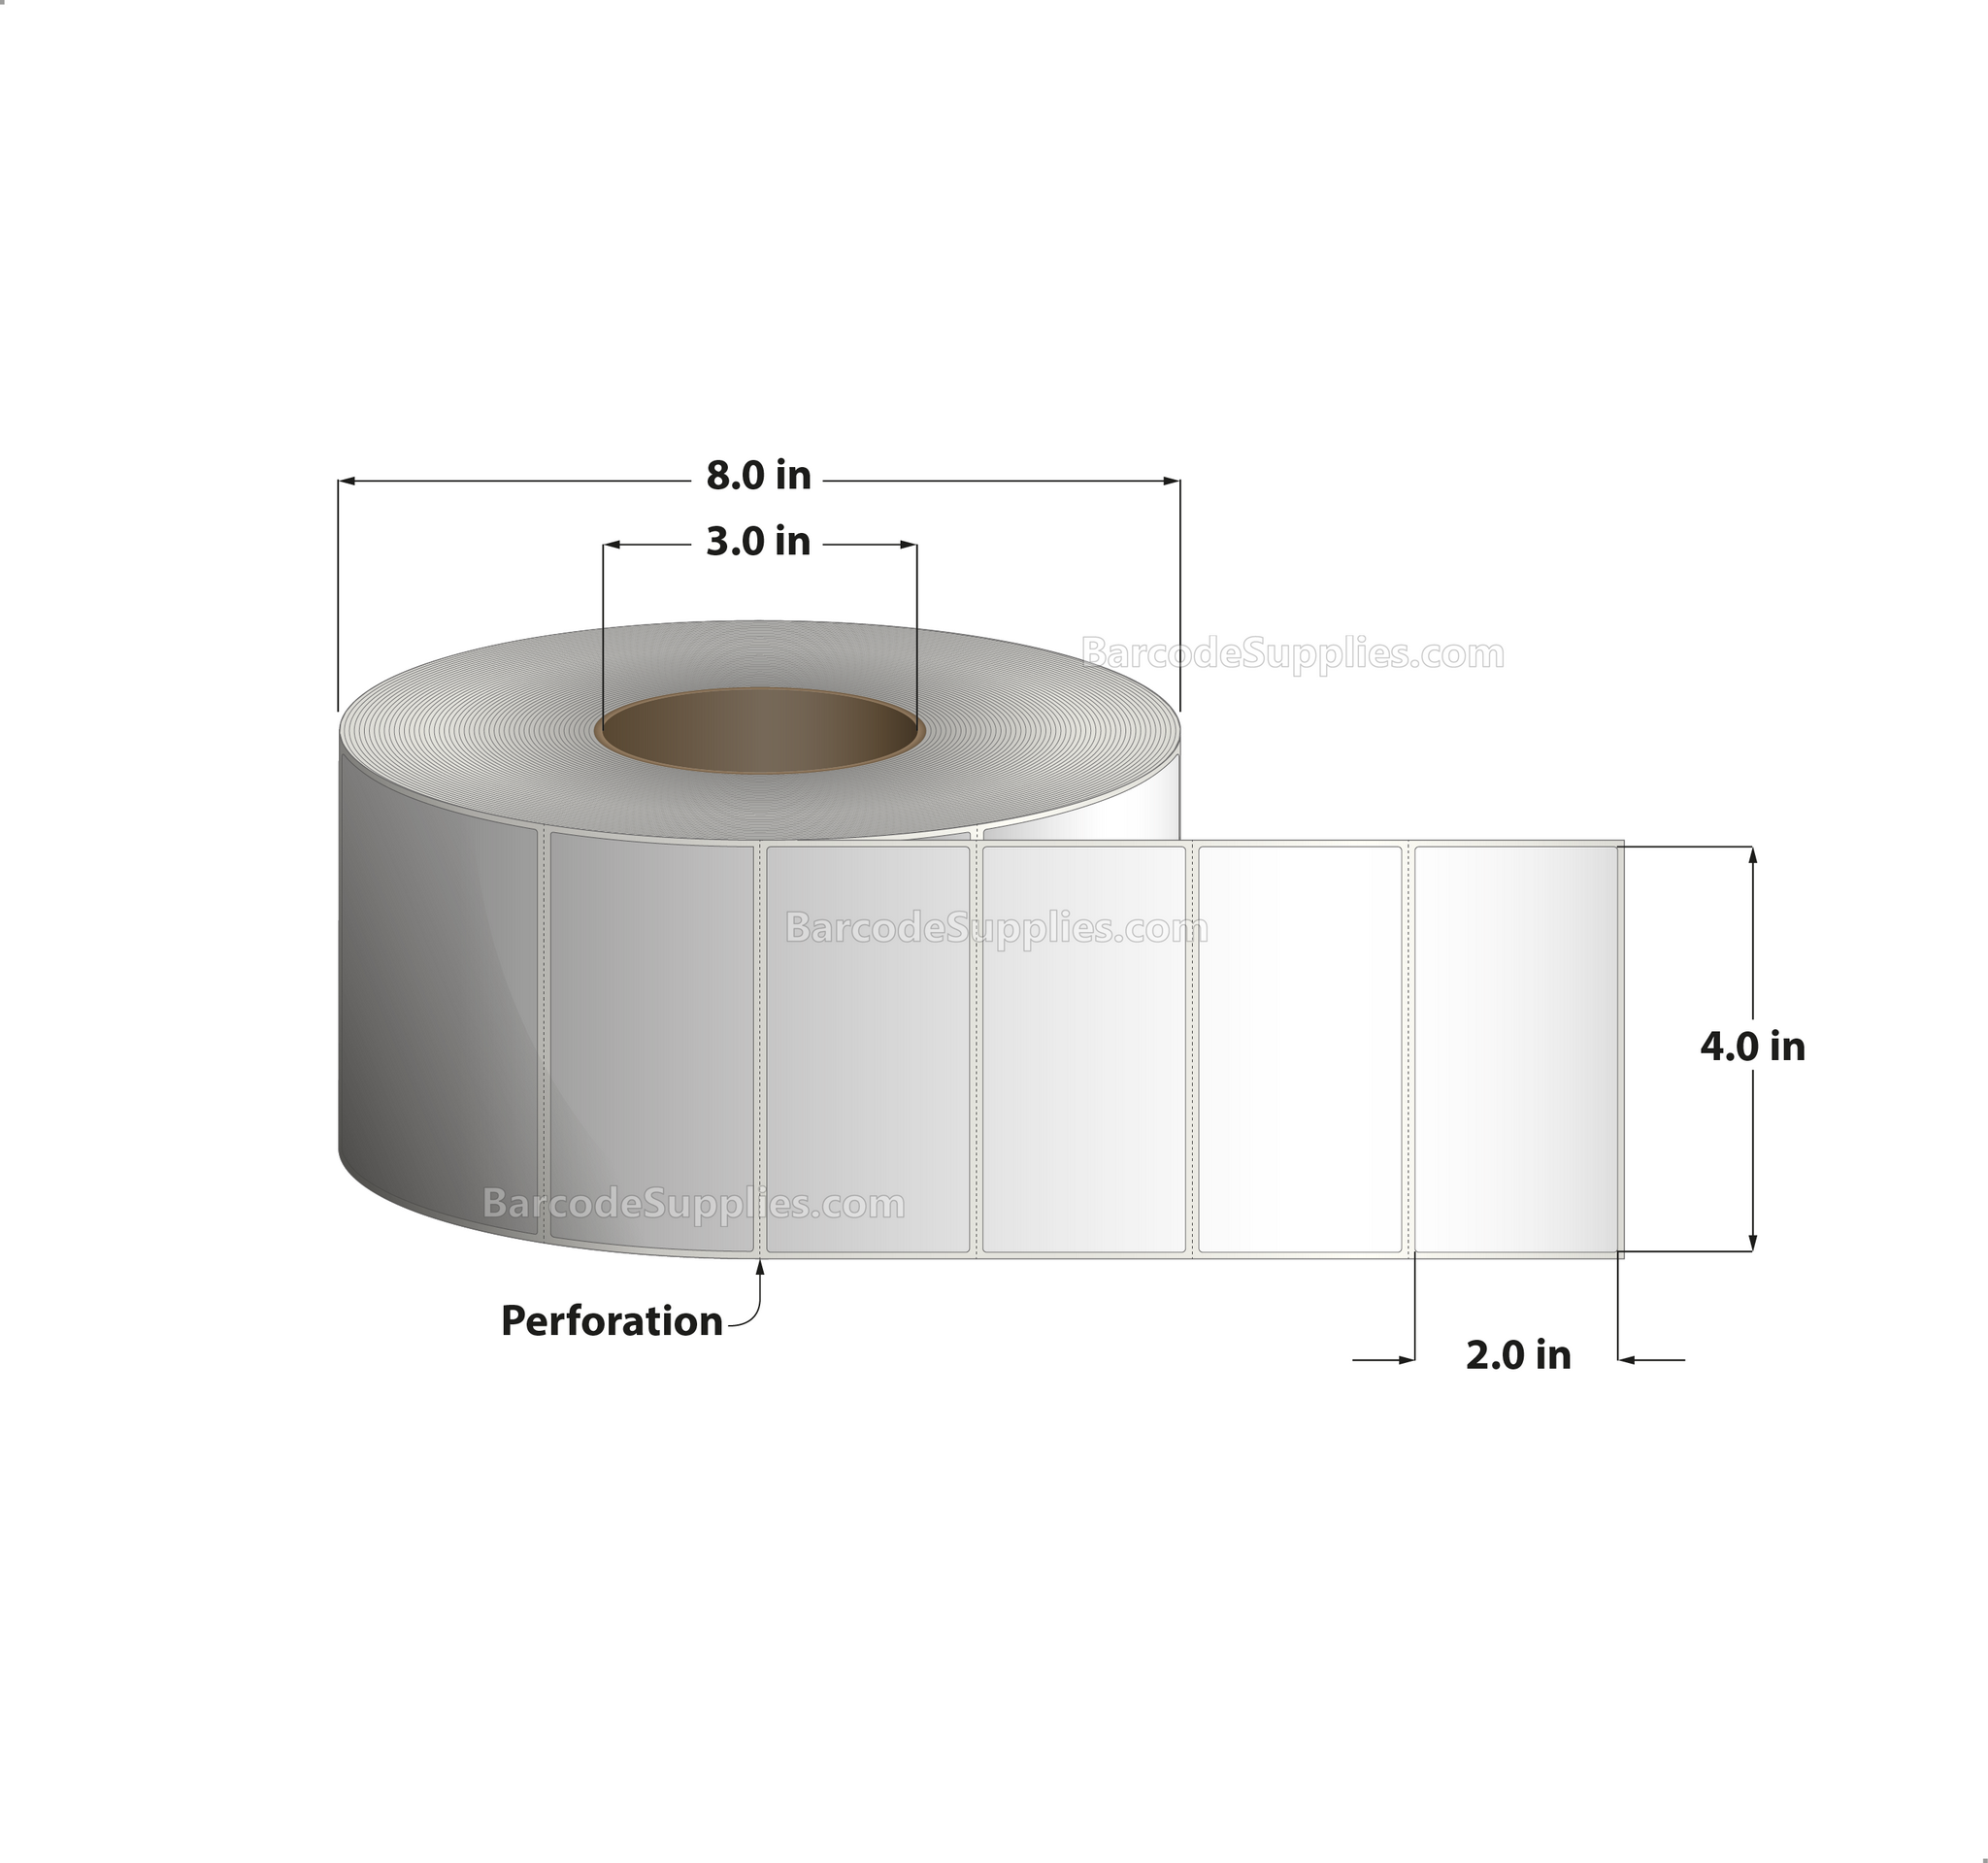 4 x 2 Direct Thermal White Labels With Permanent Acrylic Adhesive - Perforated - 1250 Labels Per Roll - Carton Of 4 Rolls - 5000 Labels Total - MPN: DT42-15PDT